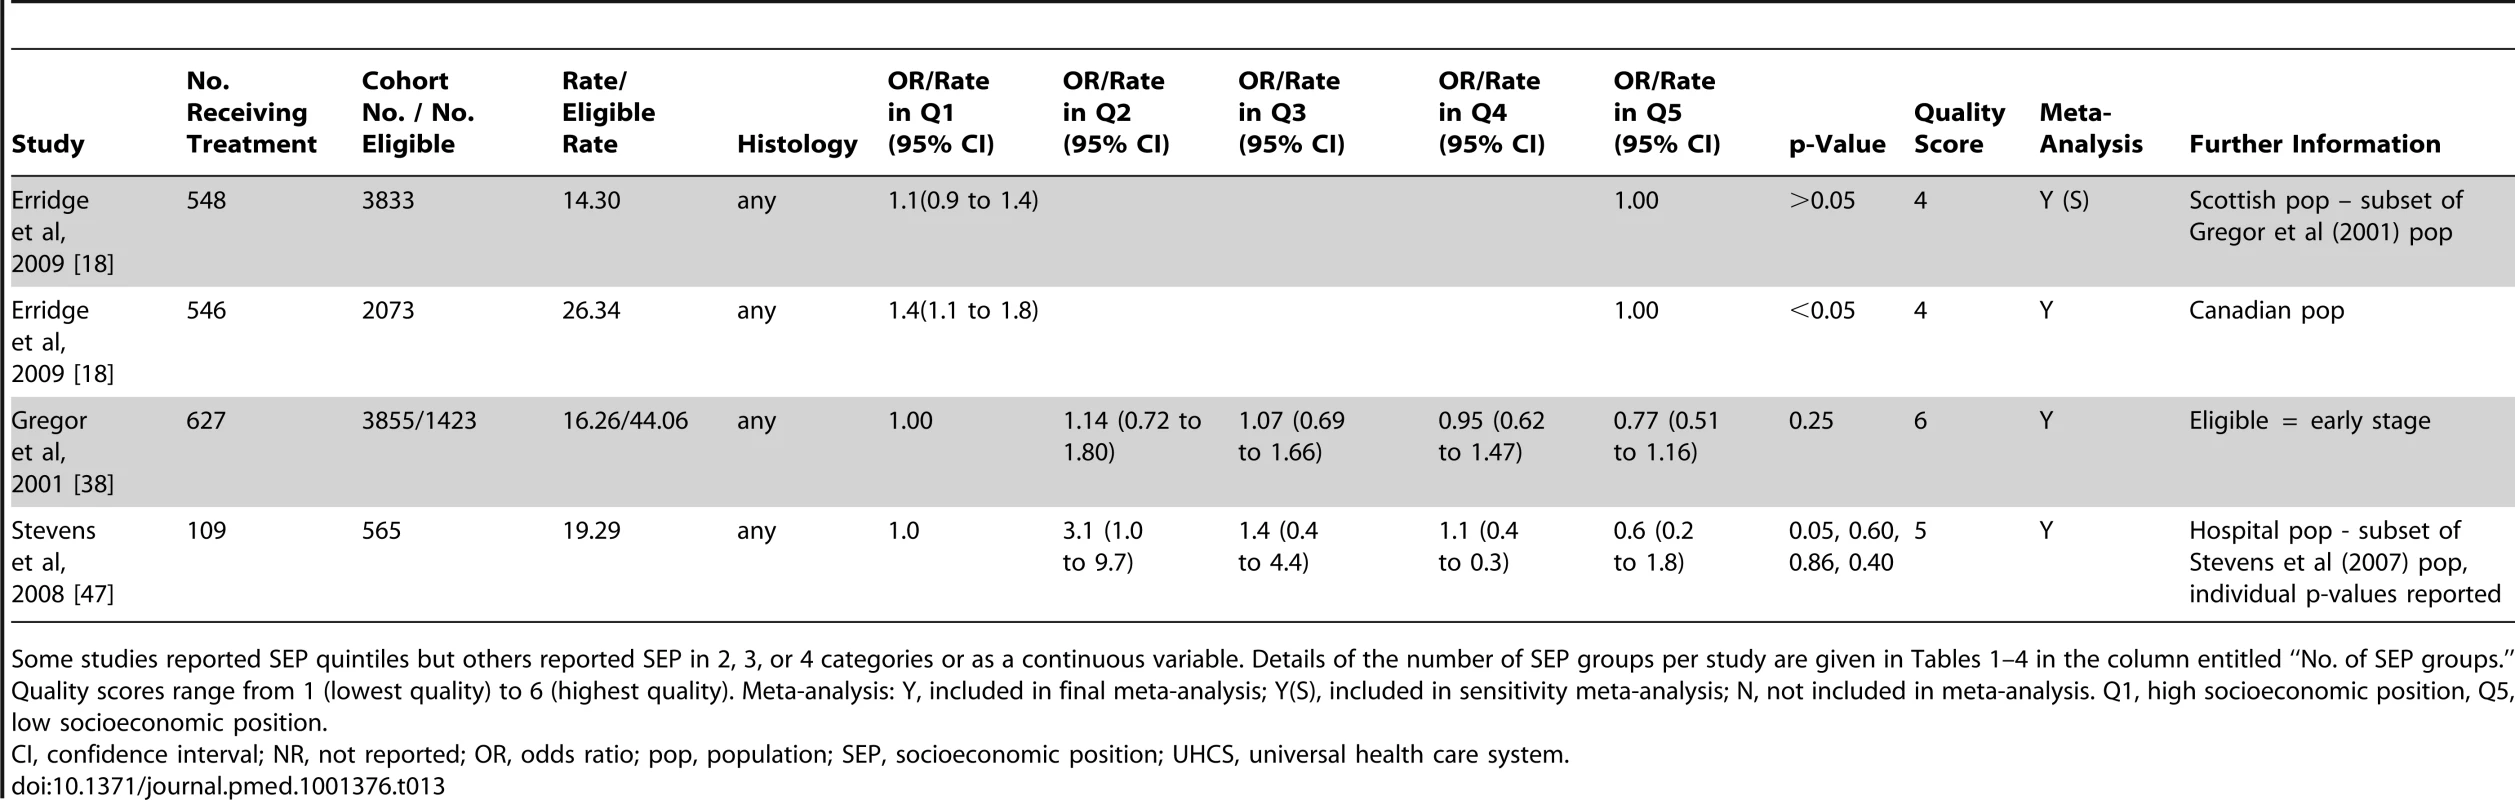 Likelihood of receipt of any type of unspecified curative treatment by SEP group (universal health care systems).